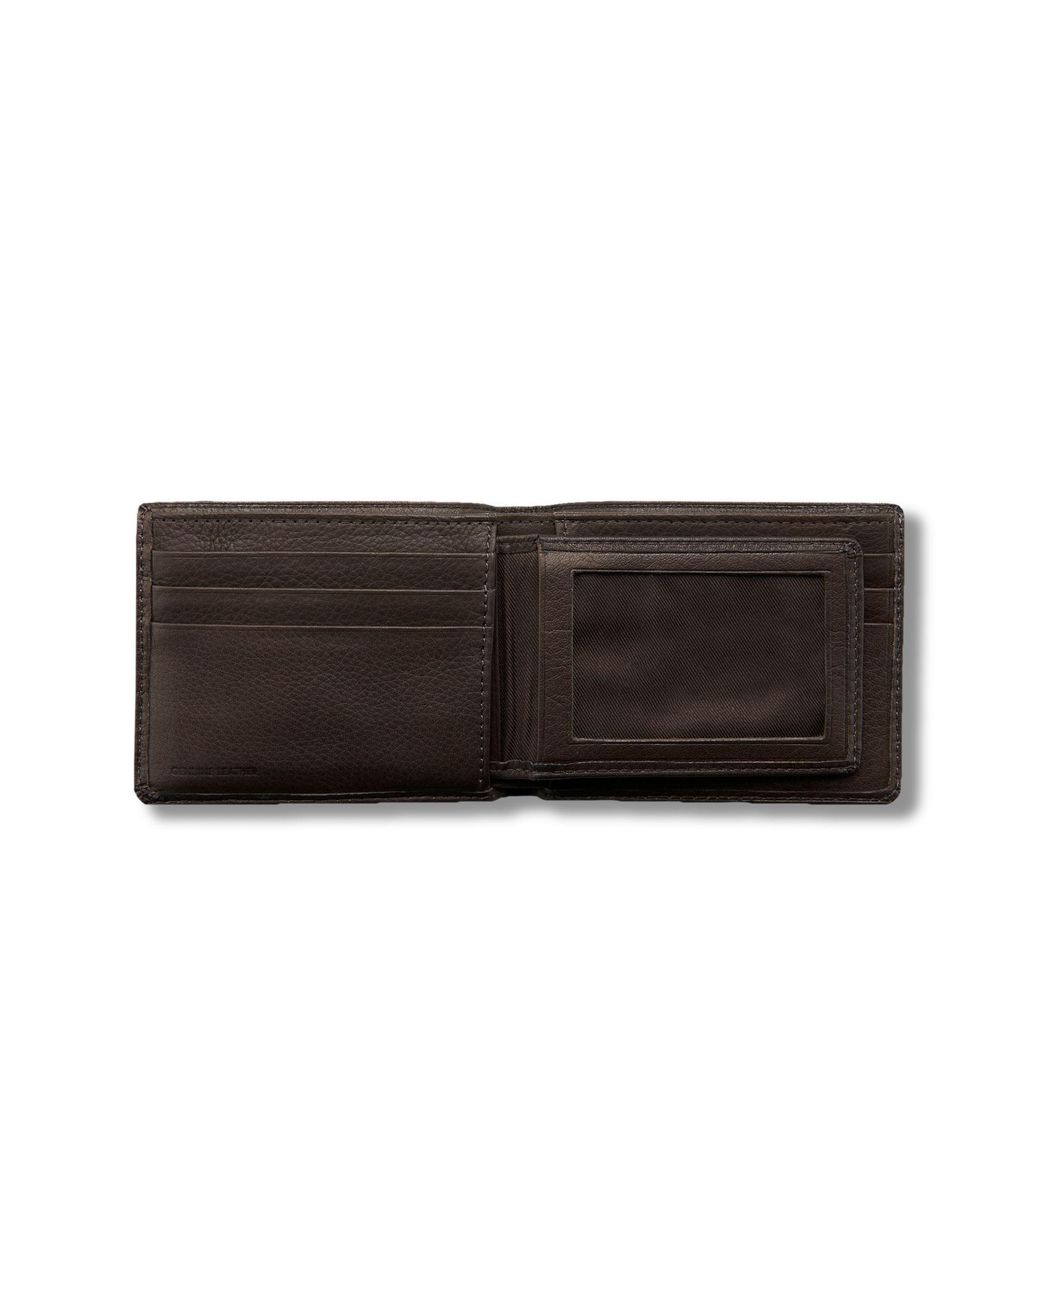 Clarks Leather Passcase Wallet in Brown for Men | Lyst